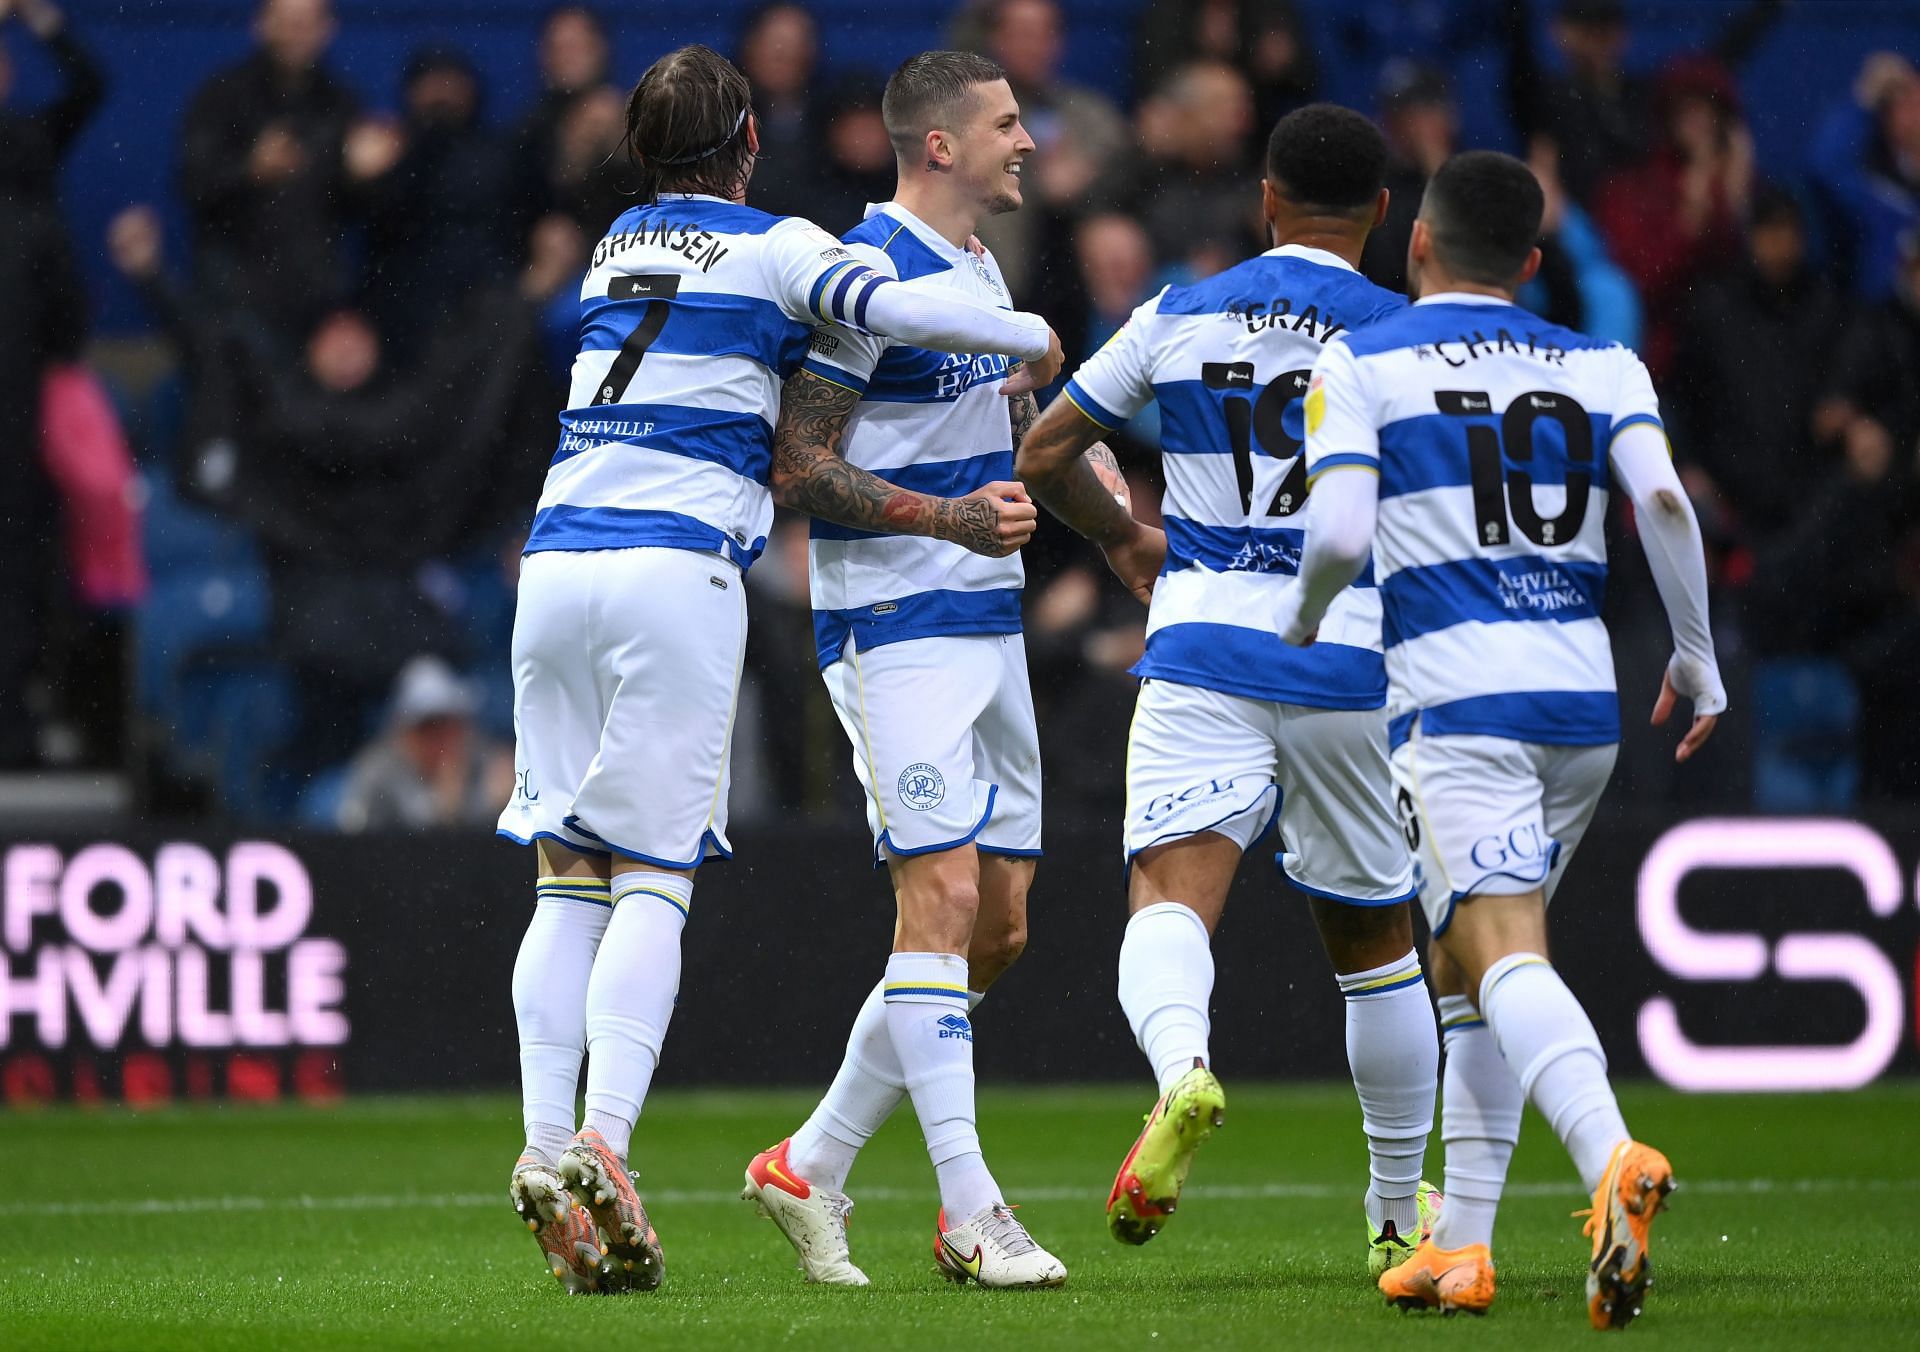 QPR will face Blackpool on Saturday